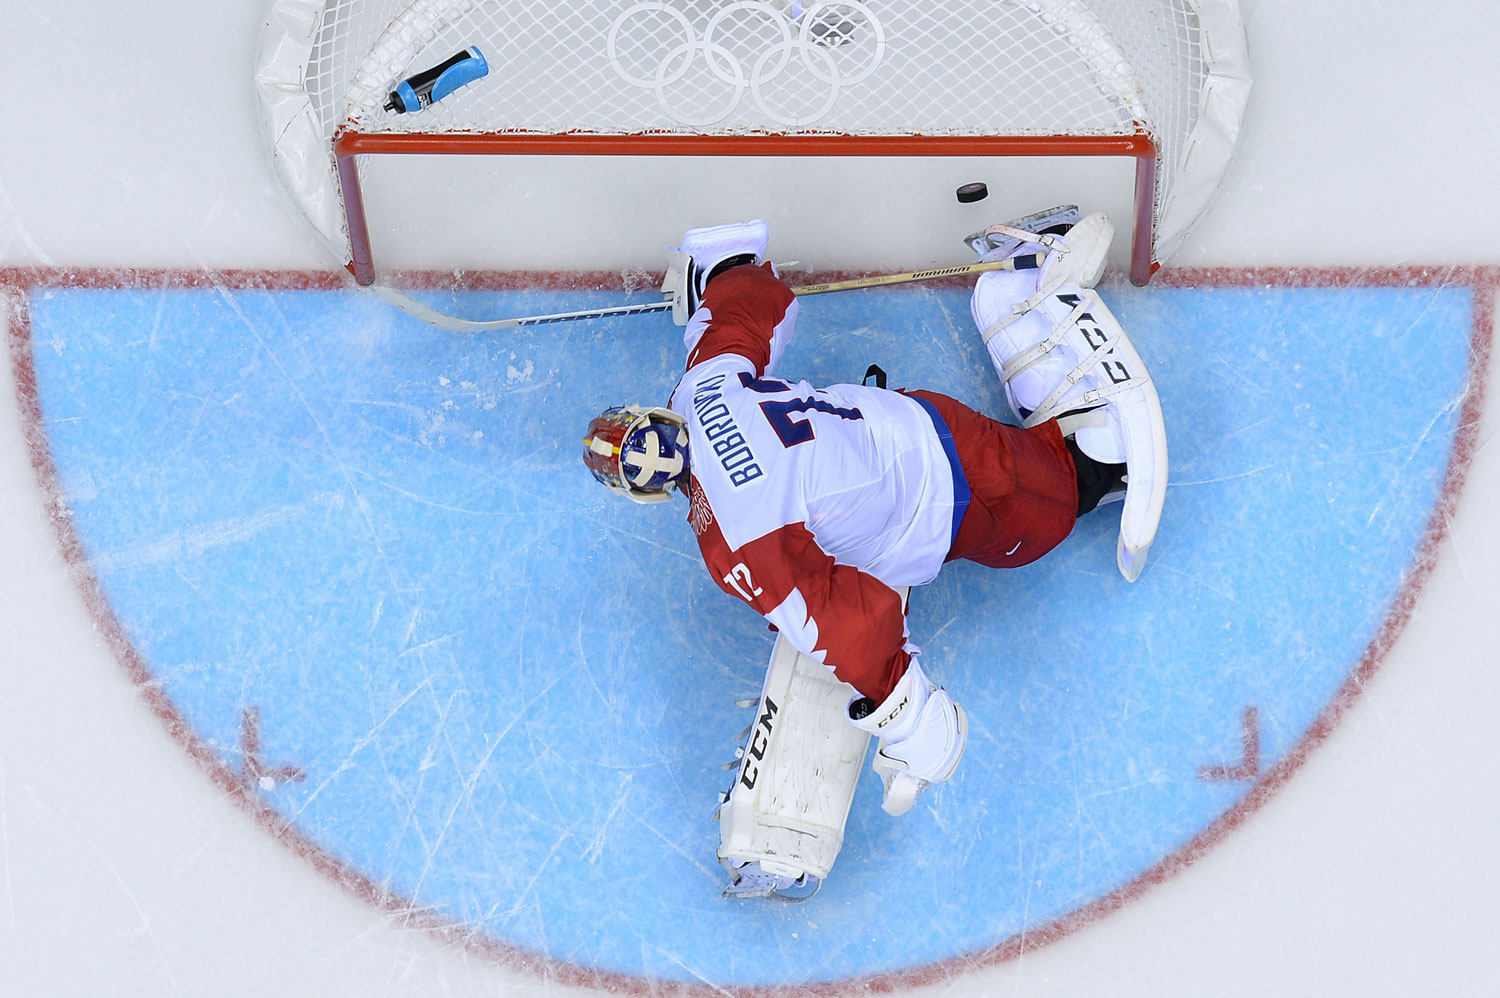 Russia's goalkeeper Sergei Bobrovski fails to stop a penalty during the Men's Ice Hockey Group A match USA vs Russia at the Bolshoy Ice Dome during the Sochi Winter Olympics on February 15, 2014 in Sochi. (Alexander Nemenov—AFP/Getty)